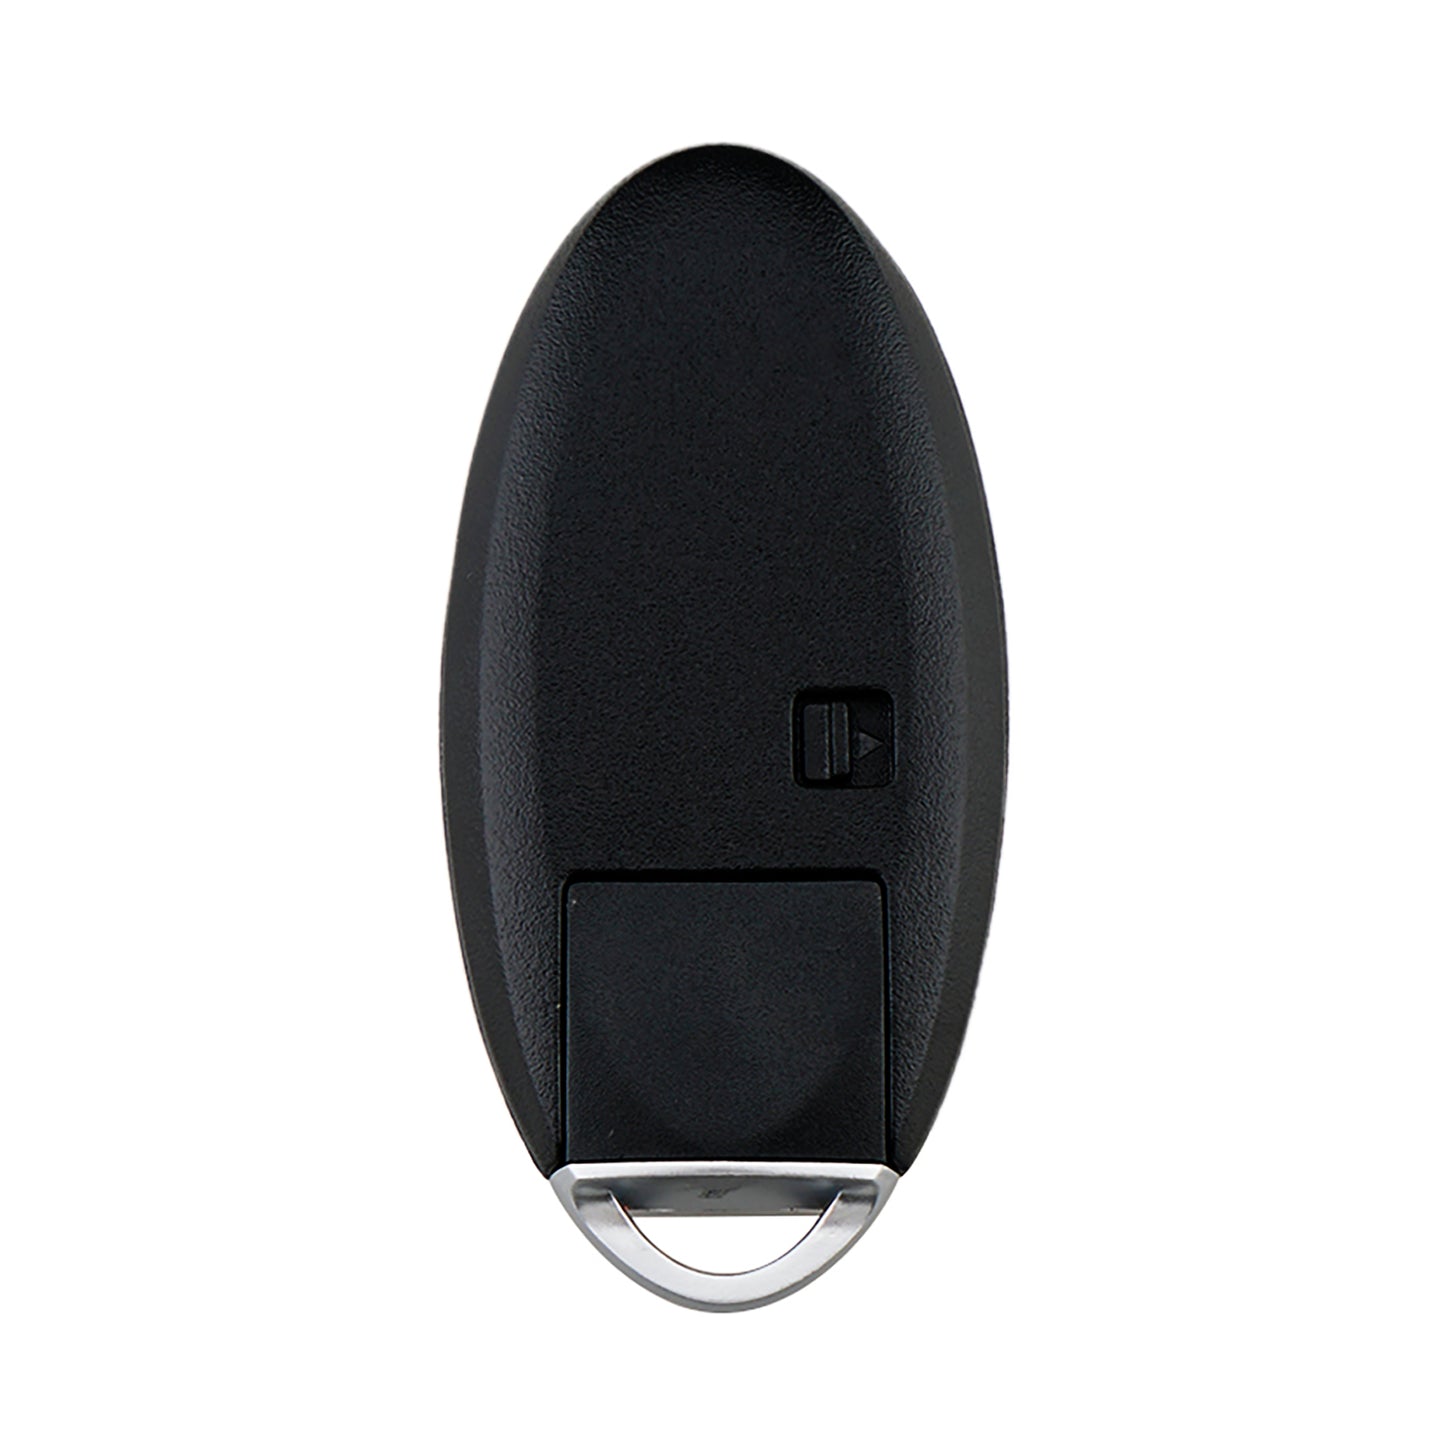 4 Buttons 433MHz KR5S180144014 ID47/7952 Chip Smart Entry Car Fob Remote Key For 2013-2016 Nissan Altima Maxima SKU : J202